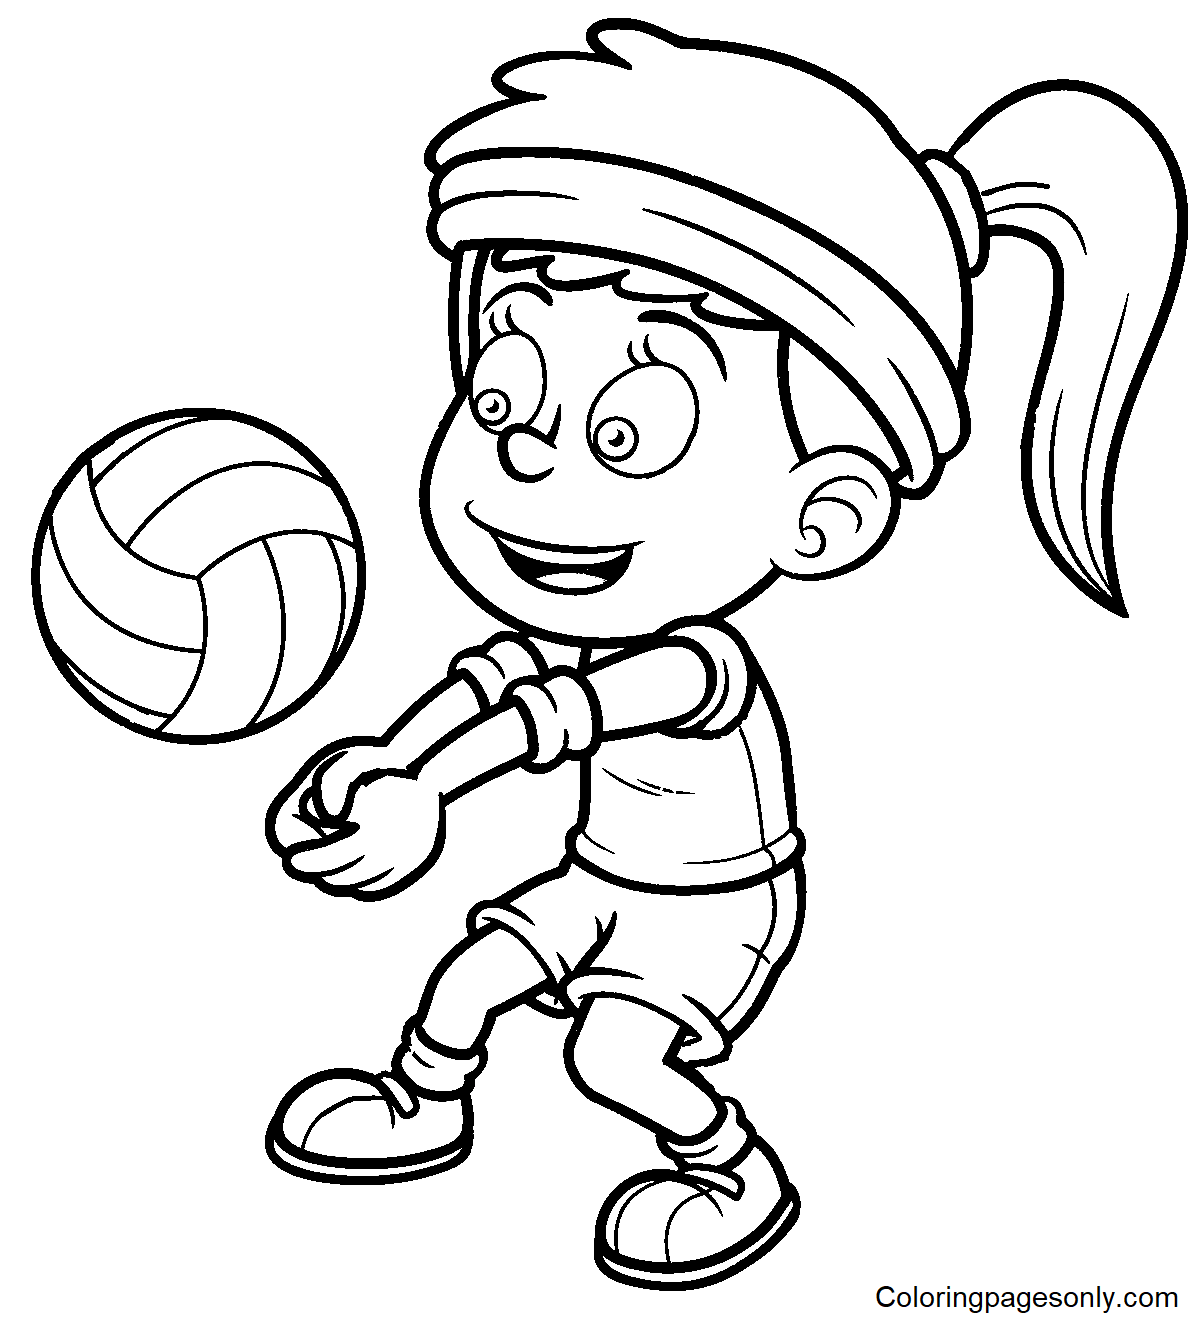 Volleyball Coloring Pages - Coloring Pages For Kids And Adults